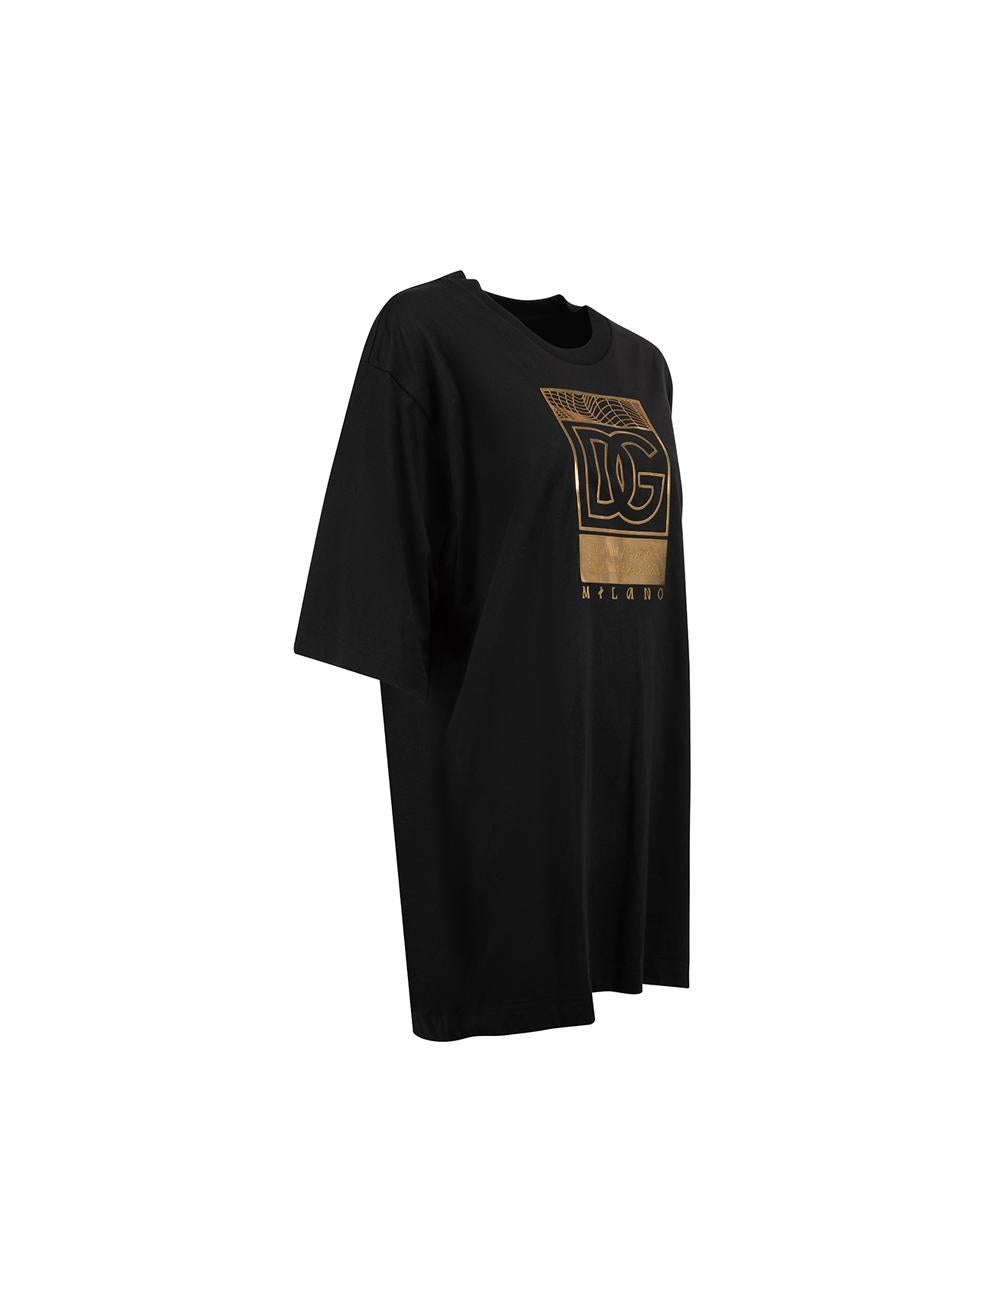 Dolce & Gabbana Black Cotton Gold Realt√† Parallela Print T-Shirt Size S In New Condition In London, GB